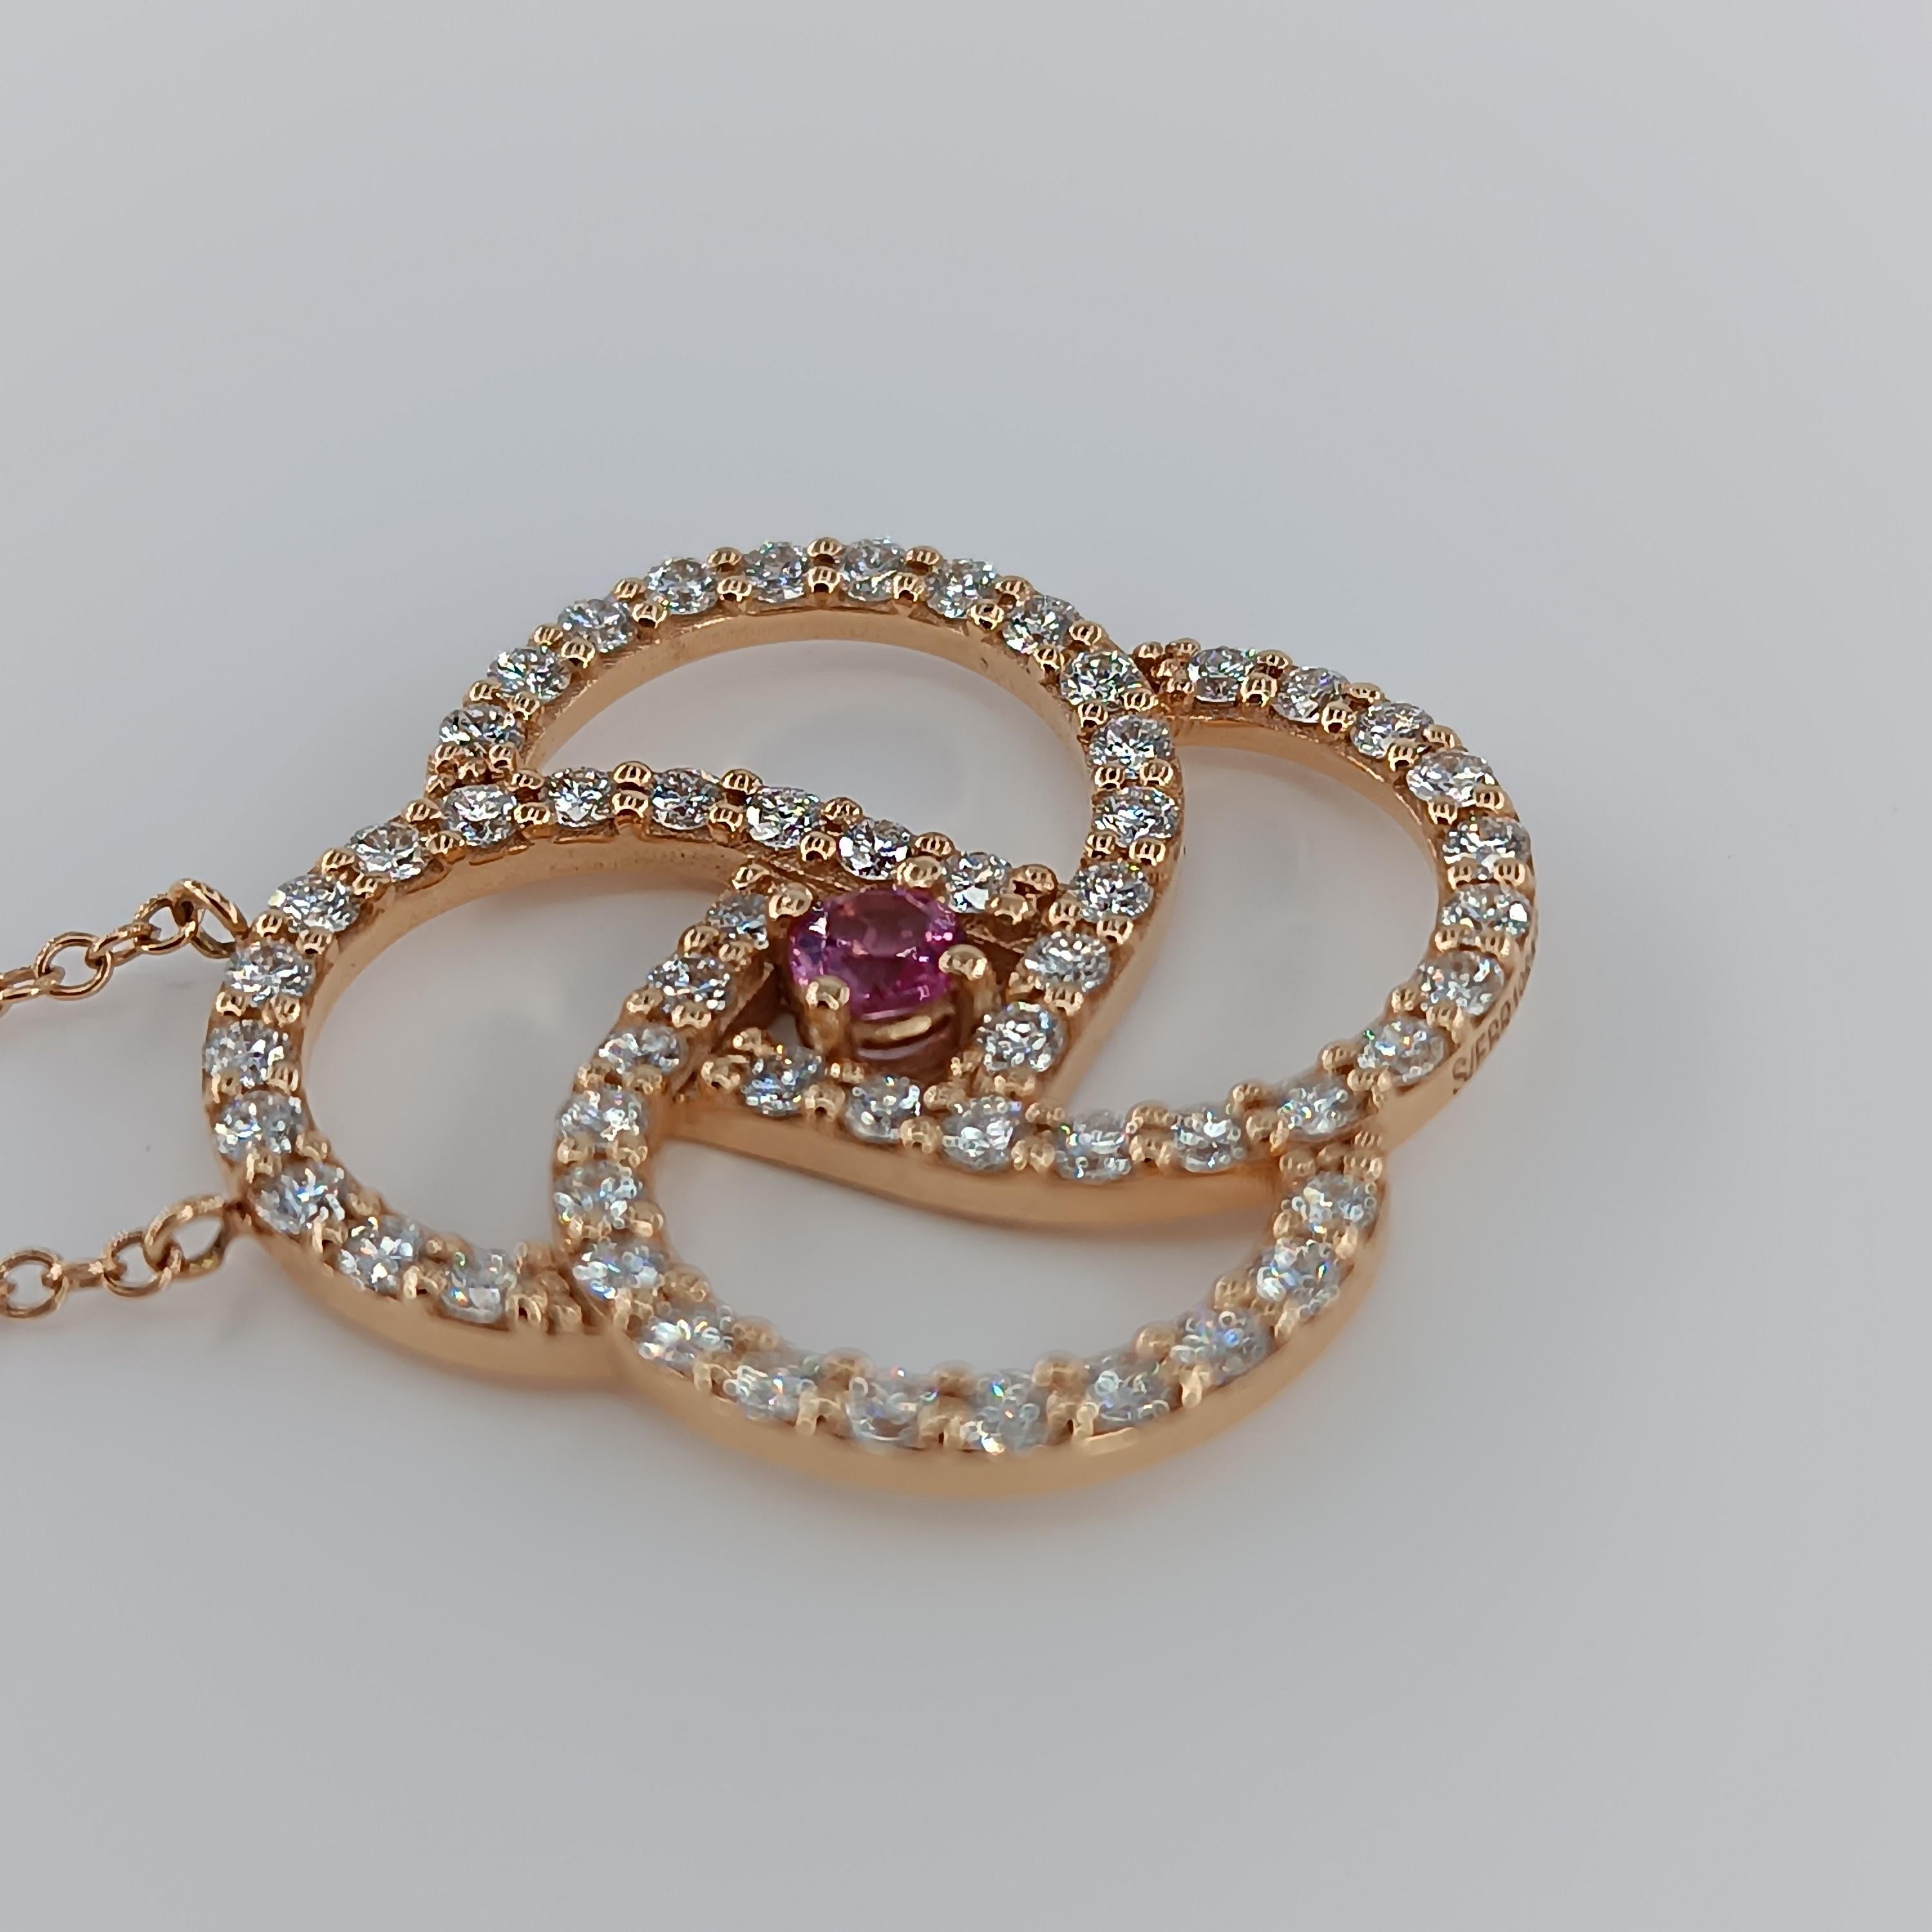 This beautiful pendant made of 18 carat Rose gold for 9.92 grams boasts a central  pink Sapphire  of 0.25 carat and 56 VS G color diamonds for a total of 1.68 carats. 
any item of our jewelry collection has a dedicated identification number lasered